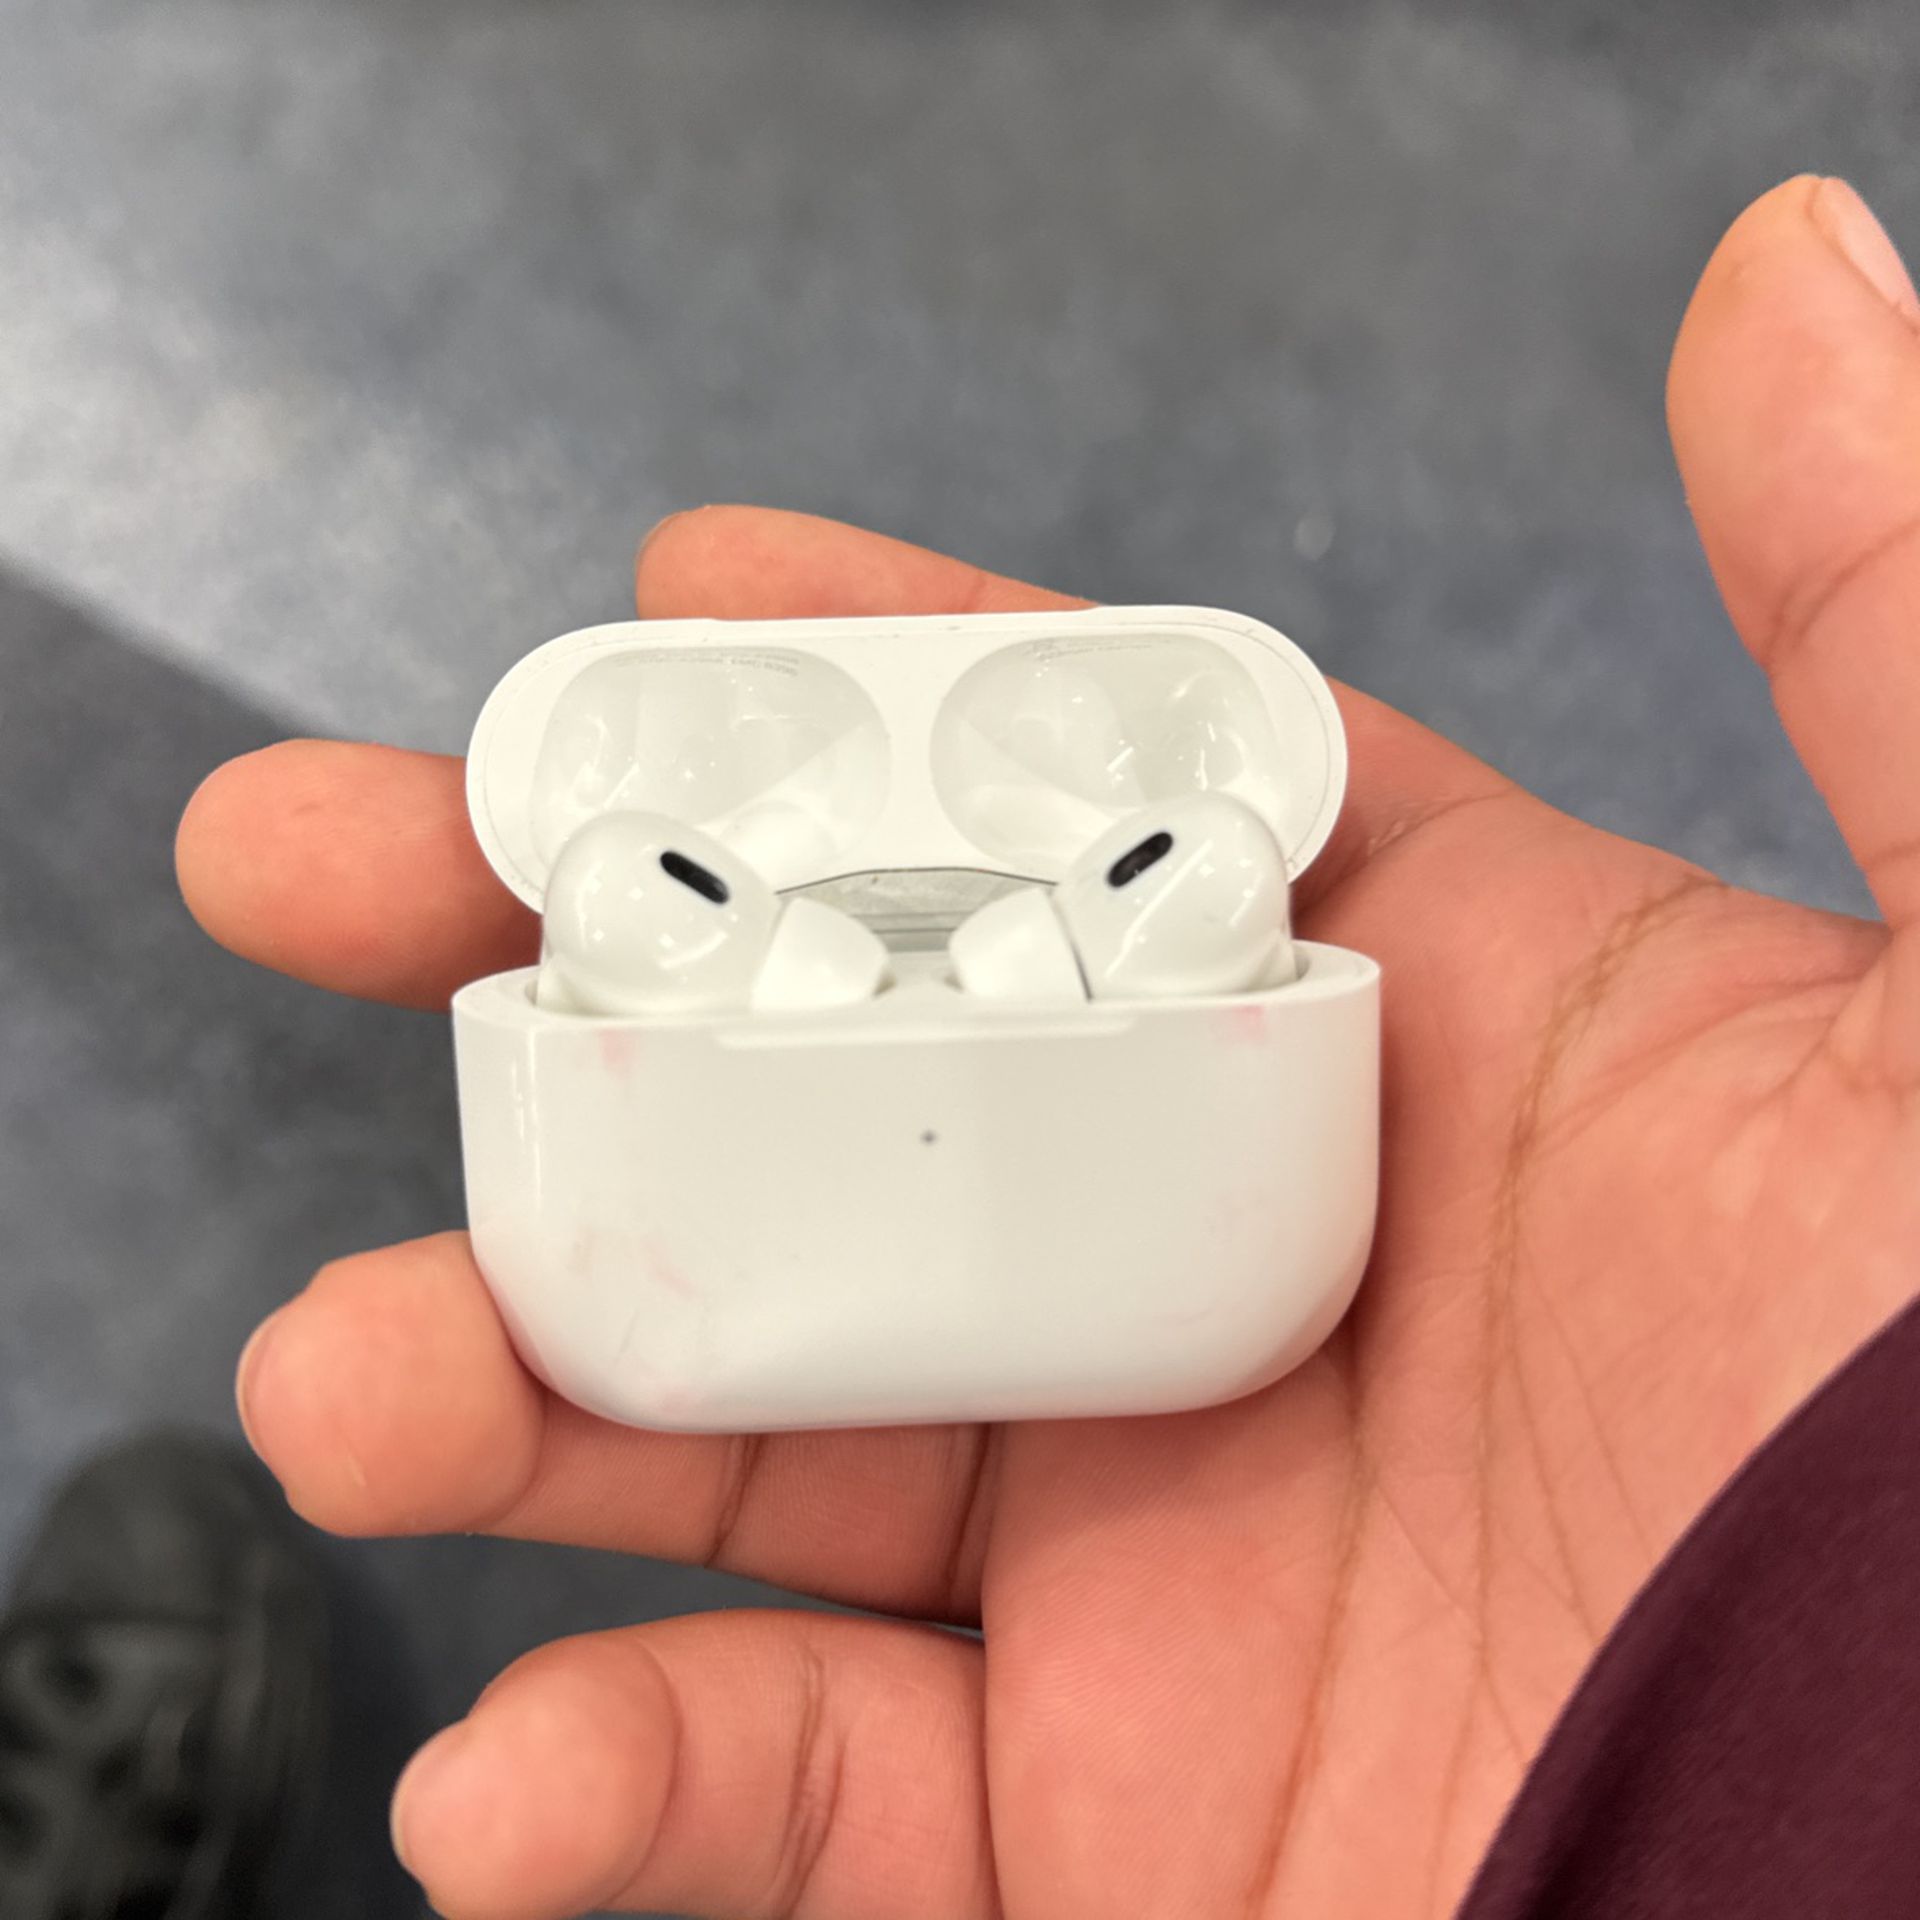 Airpods Pro 2nd generation 